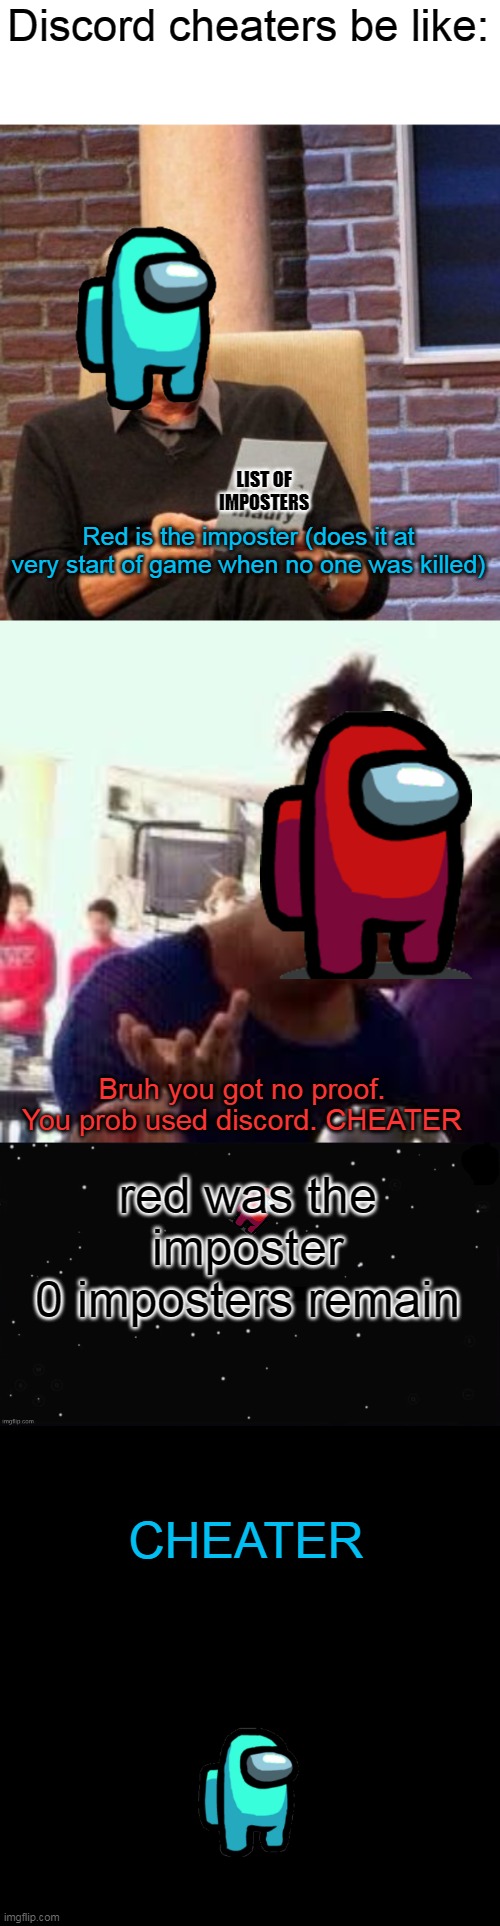 I really hate Discord cheaters in Among Us | Discord cheaters be like:; LIST OF IMPOSTERS; Red is the imposter (does it at very start of game when no one was killed); Bruh you got no proof. You prob used discord. CHEATER; red was the imposter
0 imposters remain; CHEATER | image tagged in memes,maury lie detector,bruh,x was the impostor,black screen,among us | made w/ Imgflip meme maker